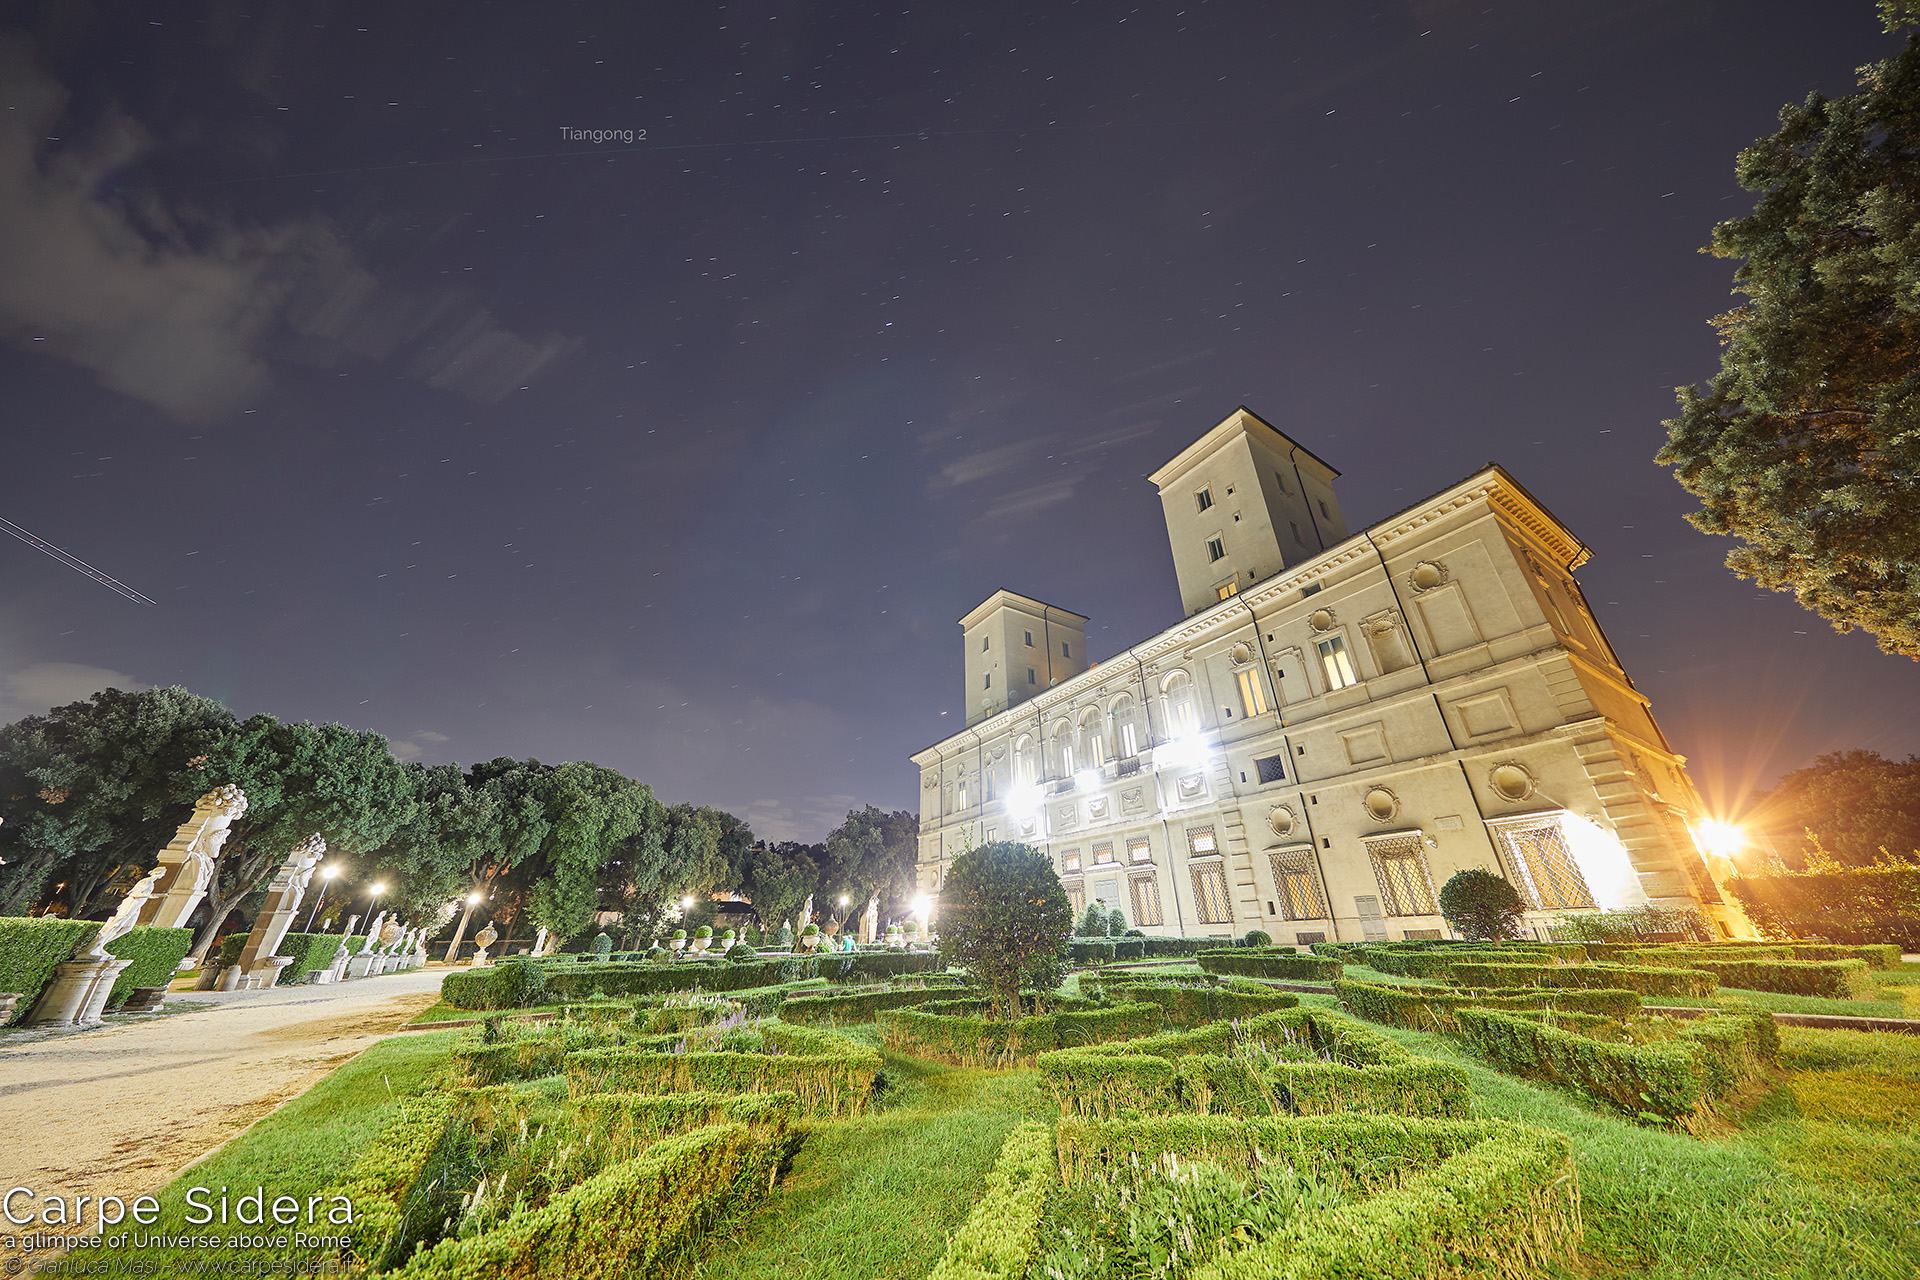 24. The Tiangong 2 Chinese space station passes above Galleria Borghese.